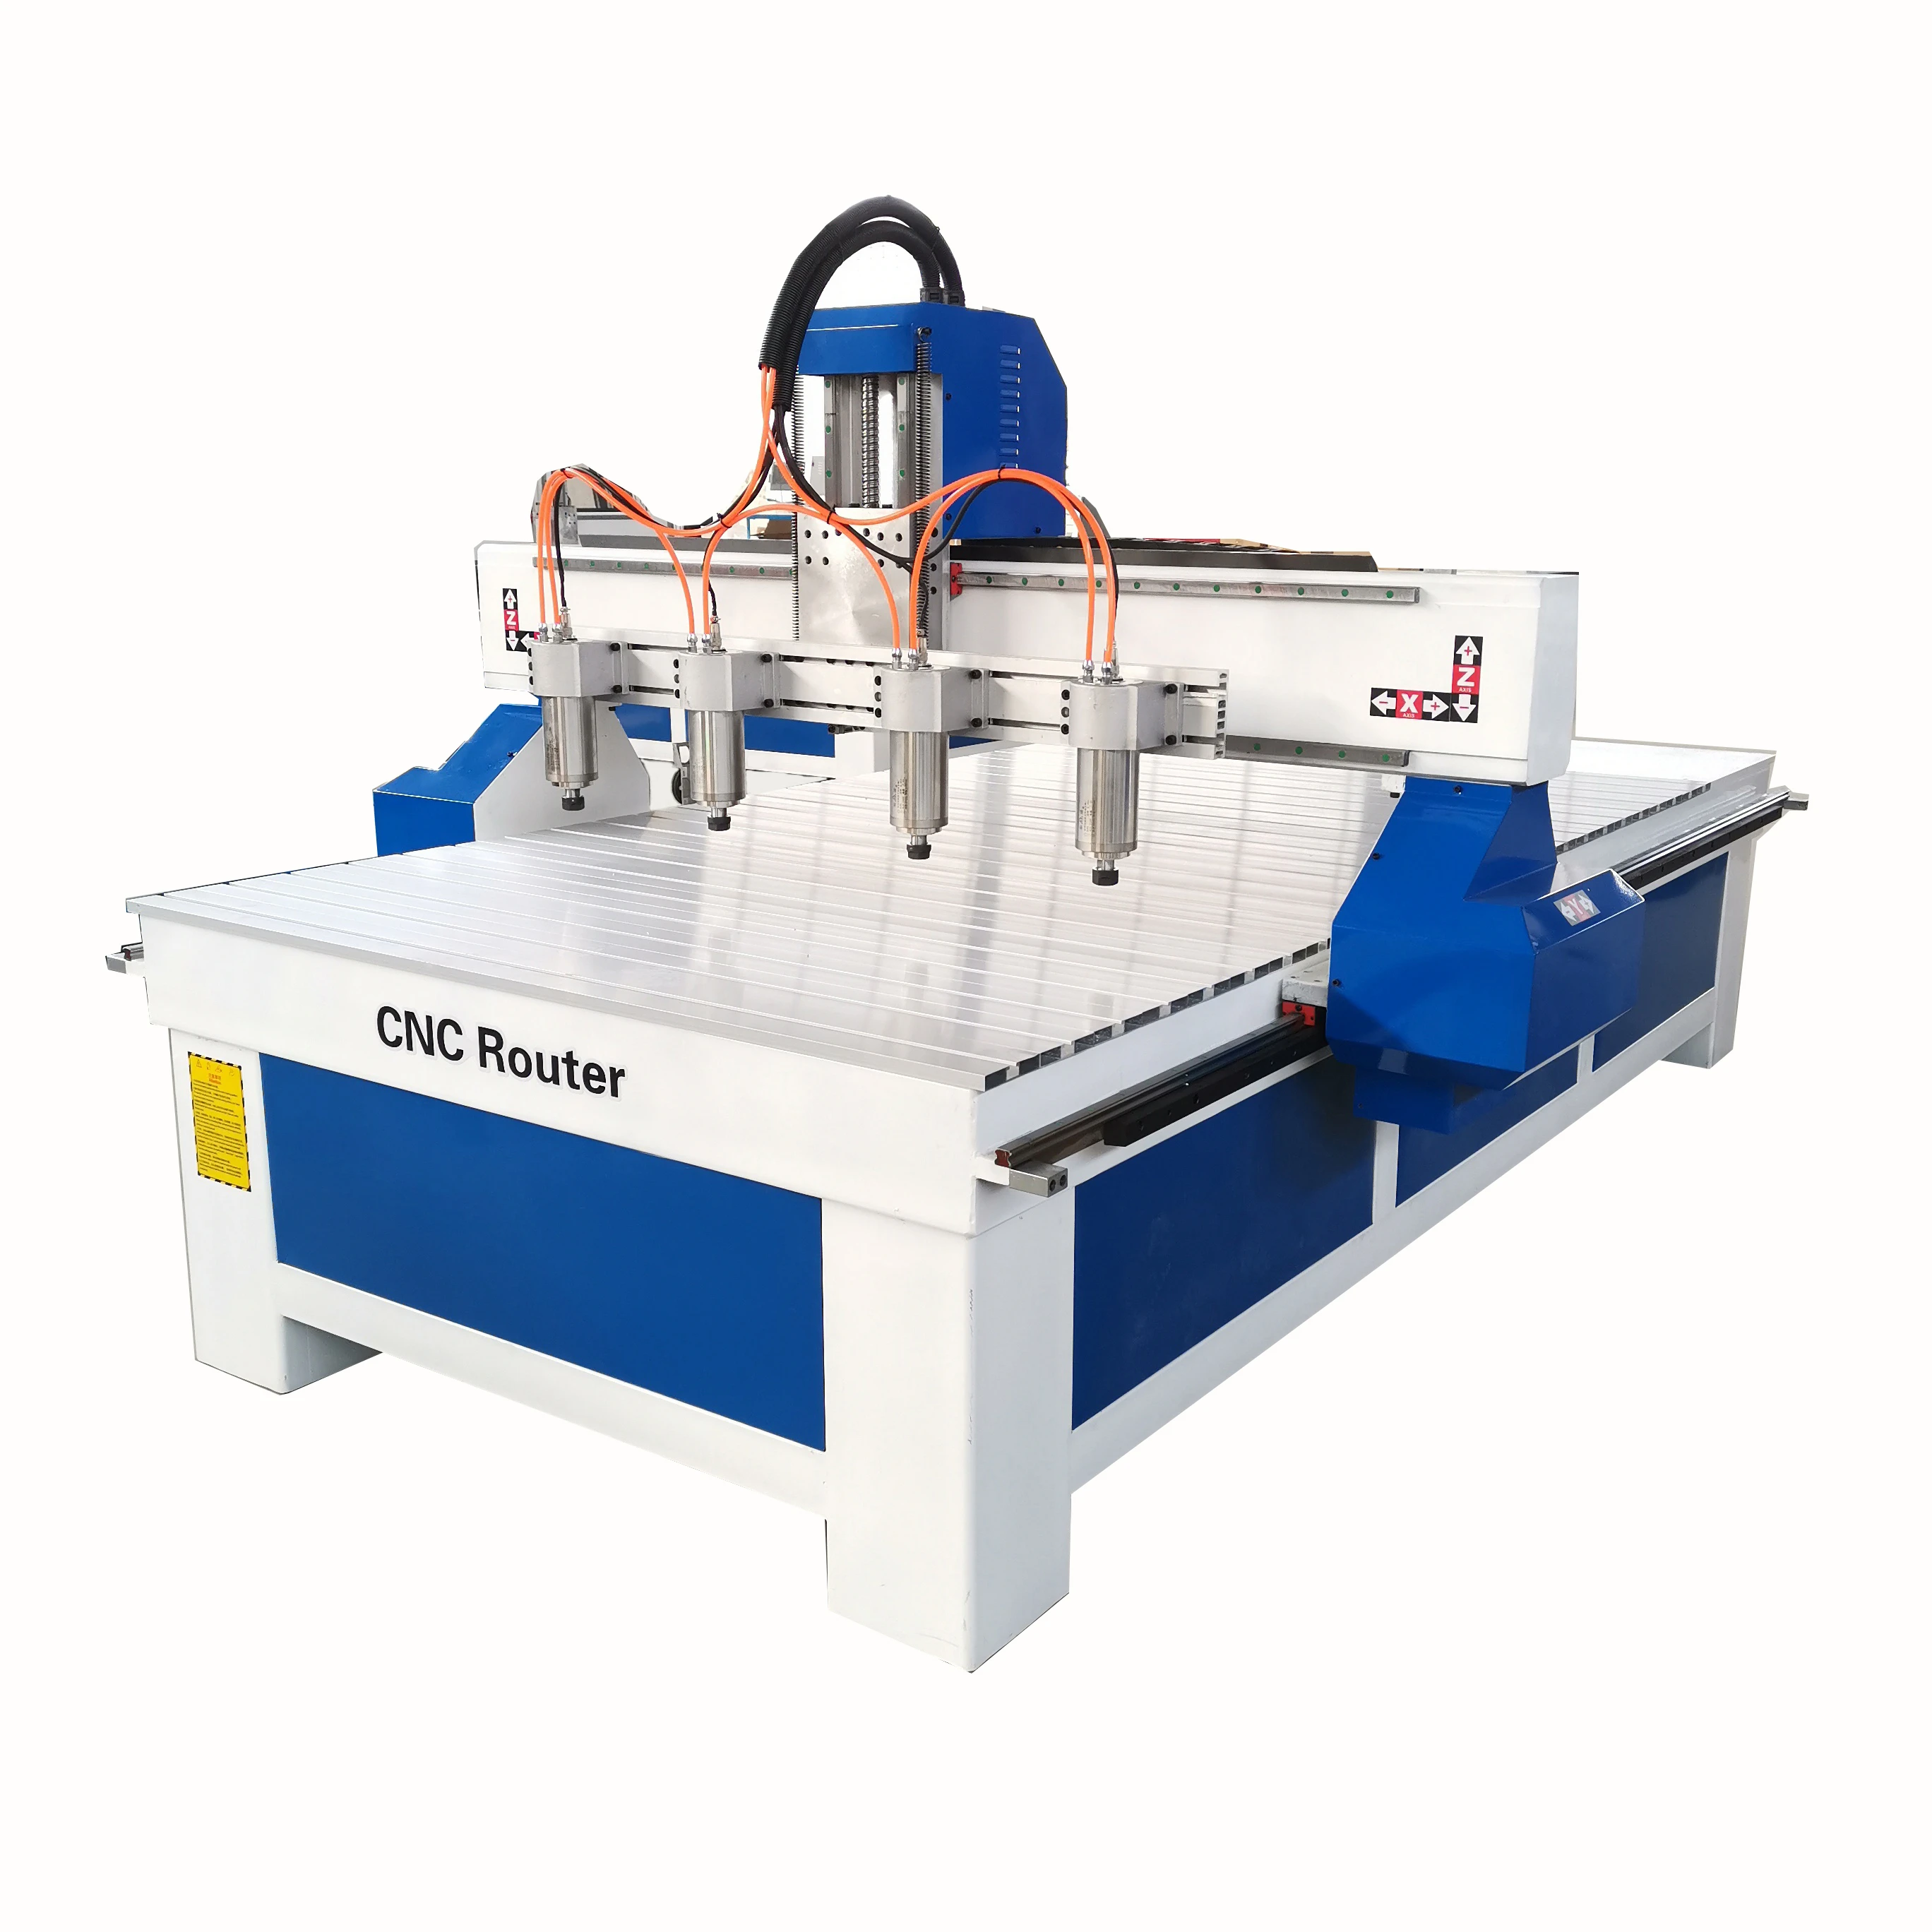 4 Axis CNC Wood Router Engraving Machine Woodworking Laser Engraving Machine